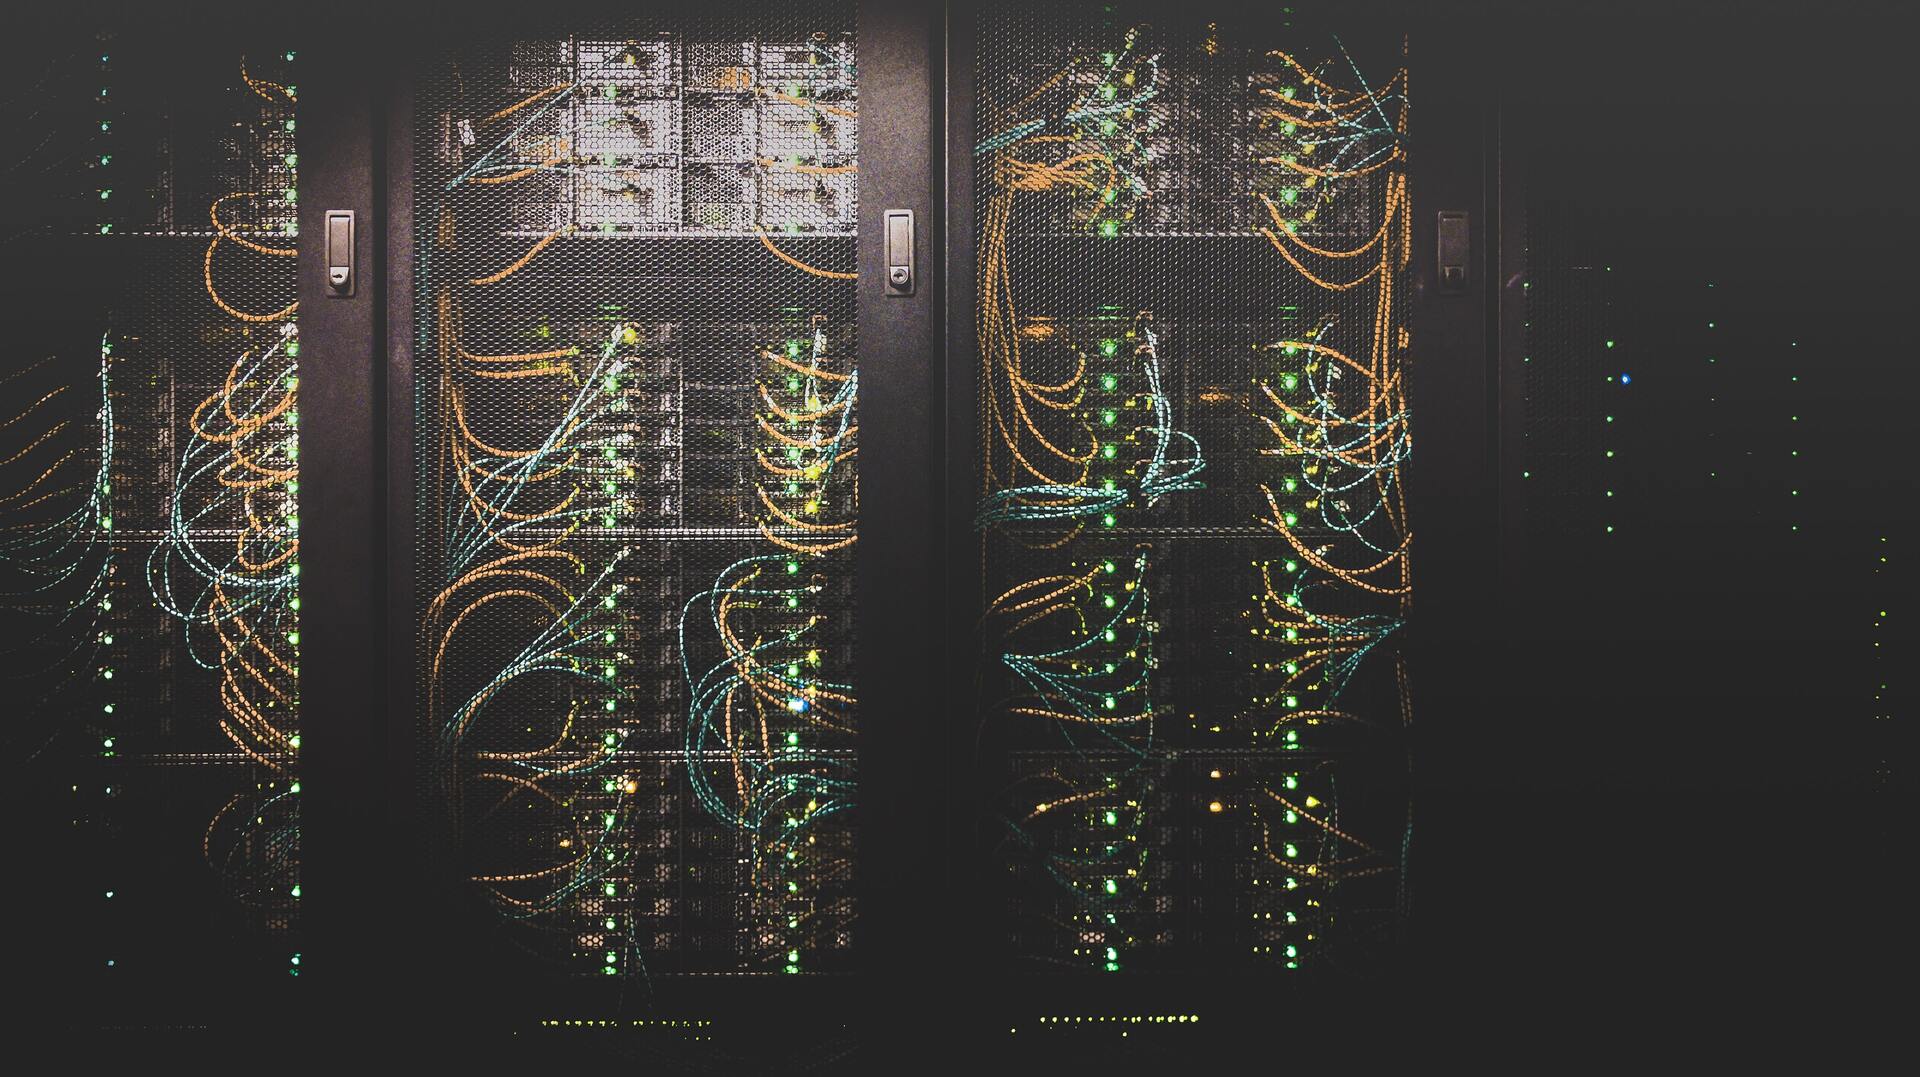 Background picture of server racks